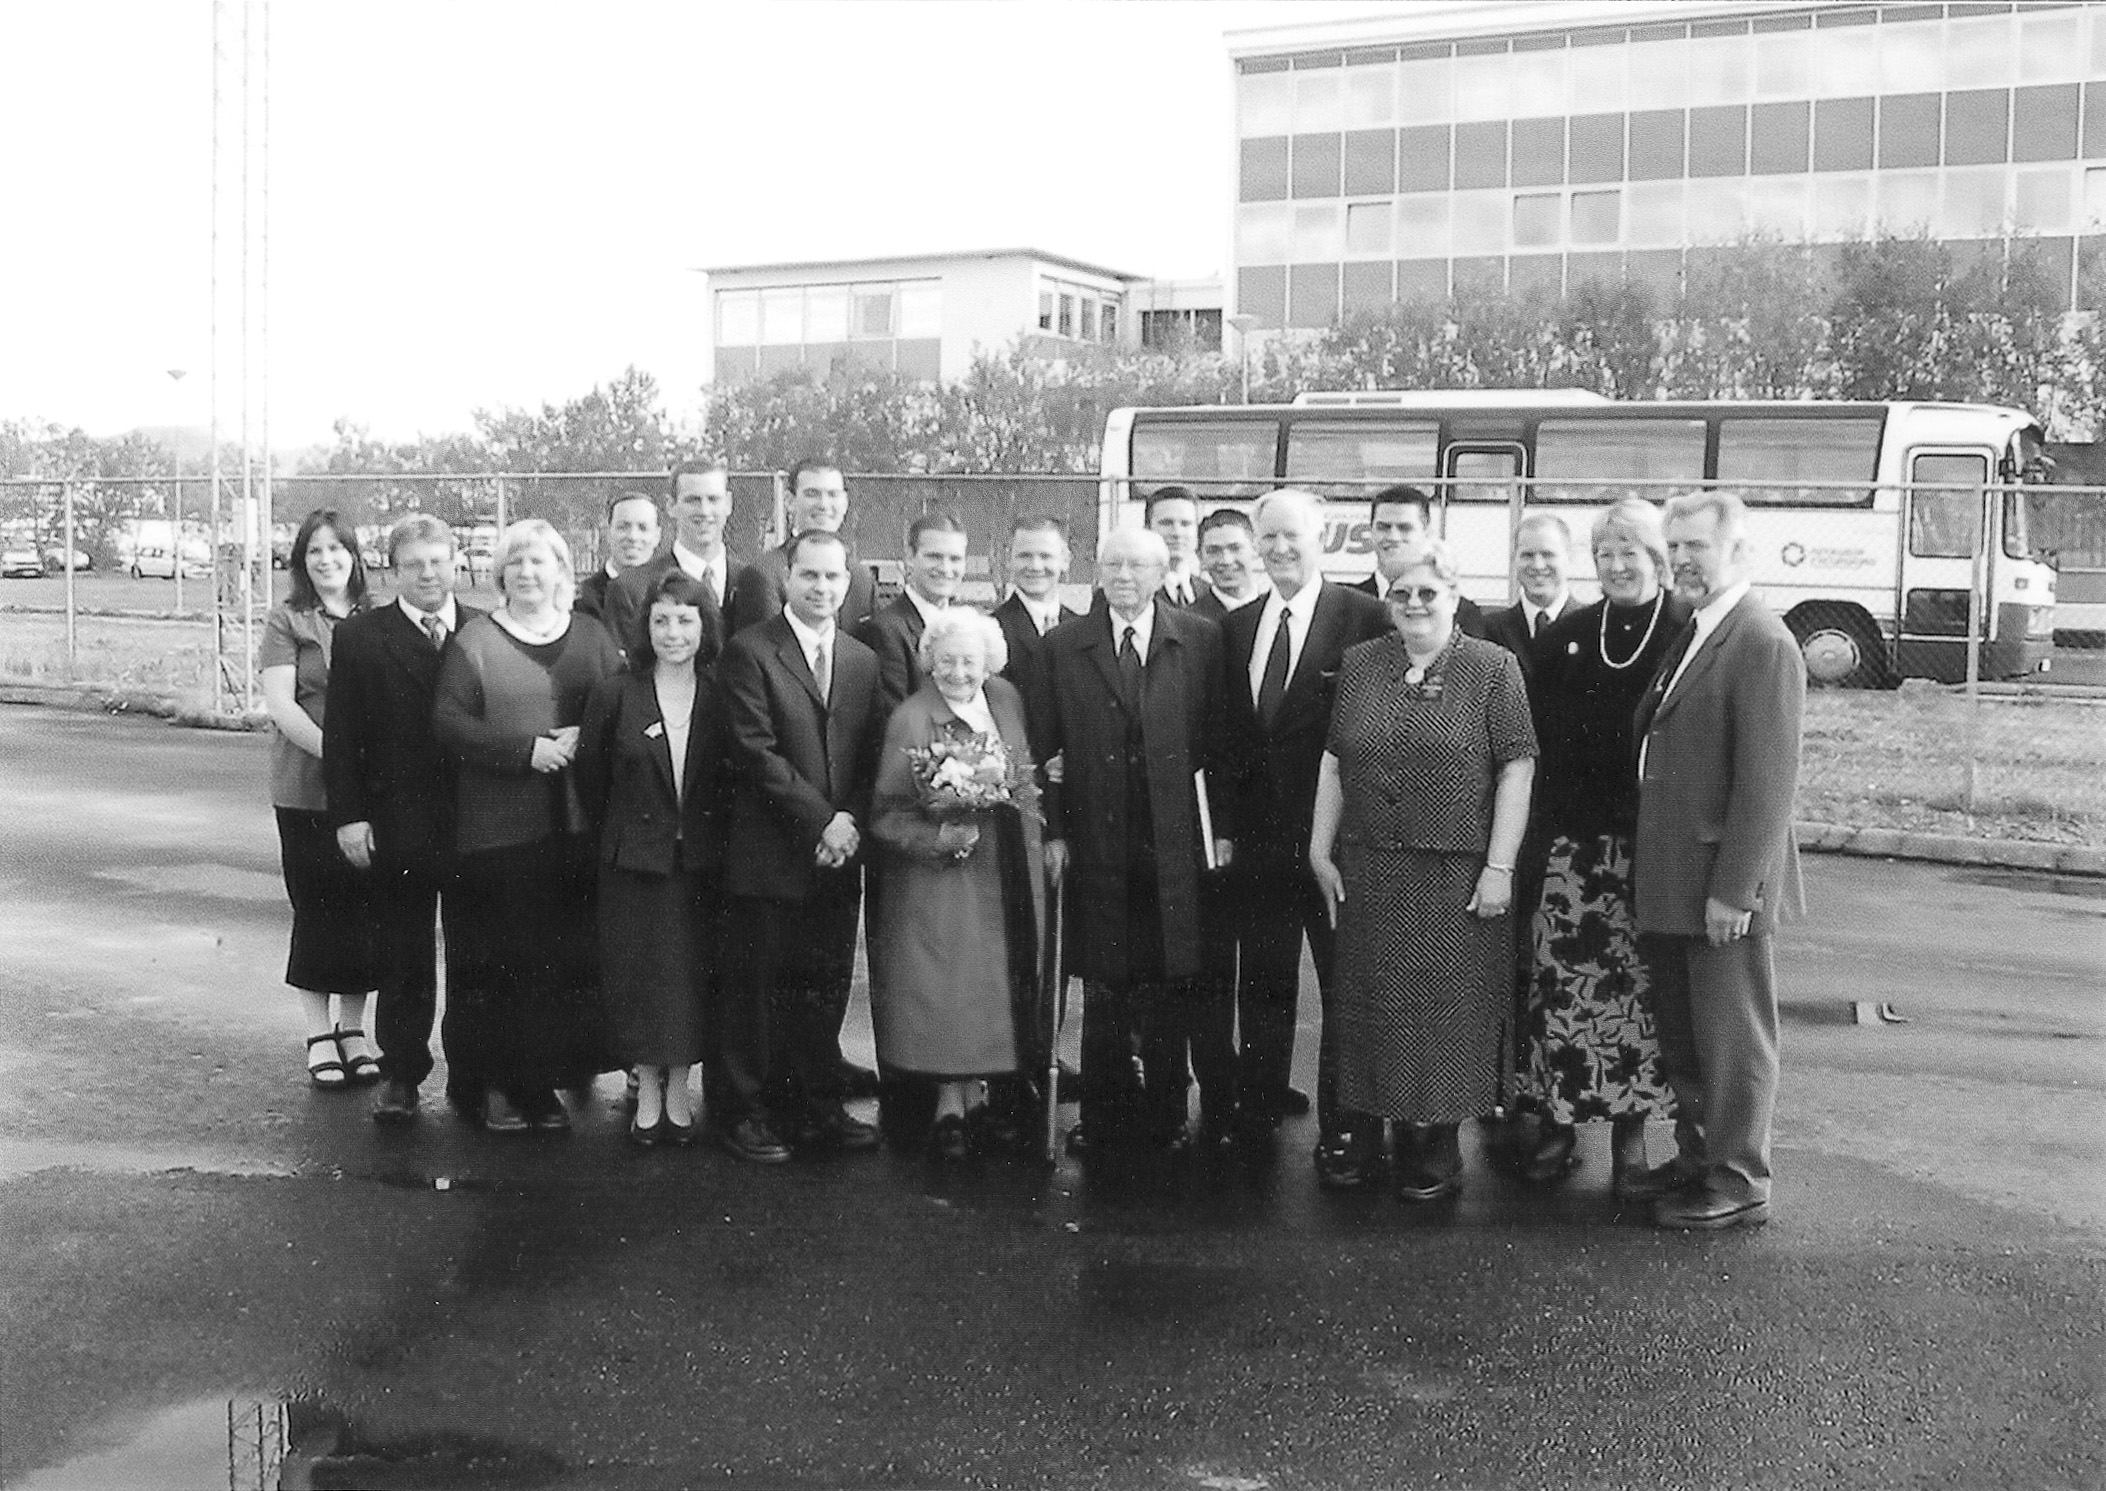 President Gordon B. Hinckley, the first Latter-day Saint prophet to step foot on Iceland, and his wife, Marjorie Pay Hinckley, stands with some of the Saints of Iceland in Reykjavík, 2002. Courtesy of David A. Ashby